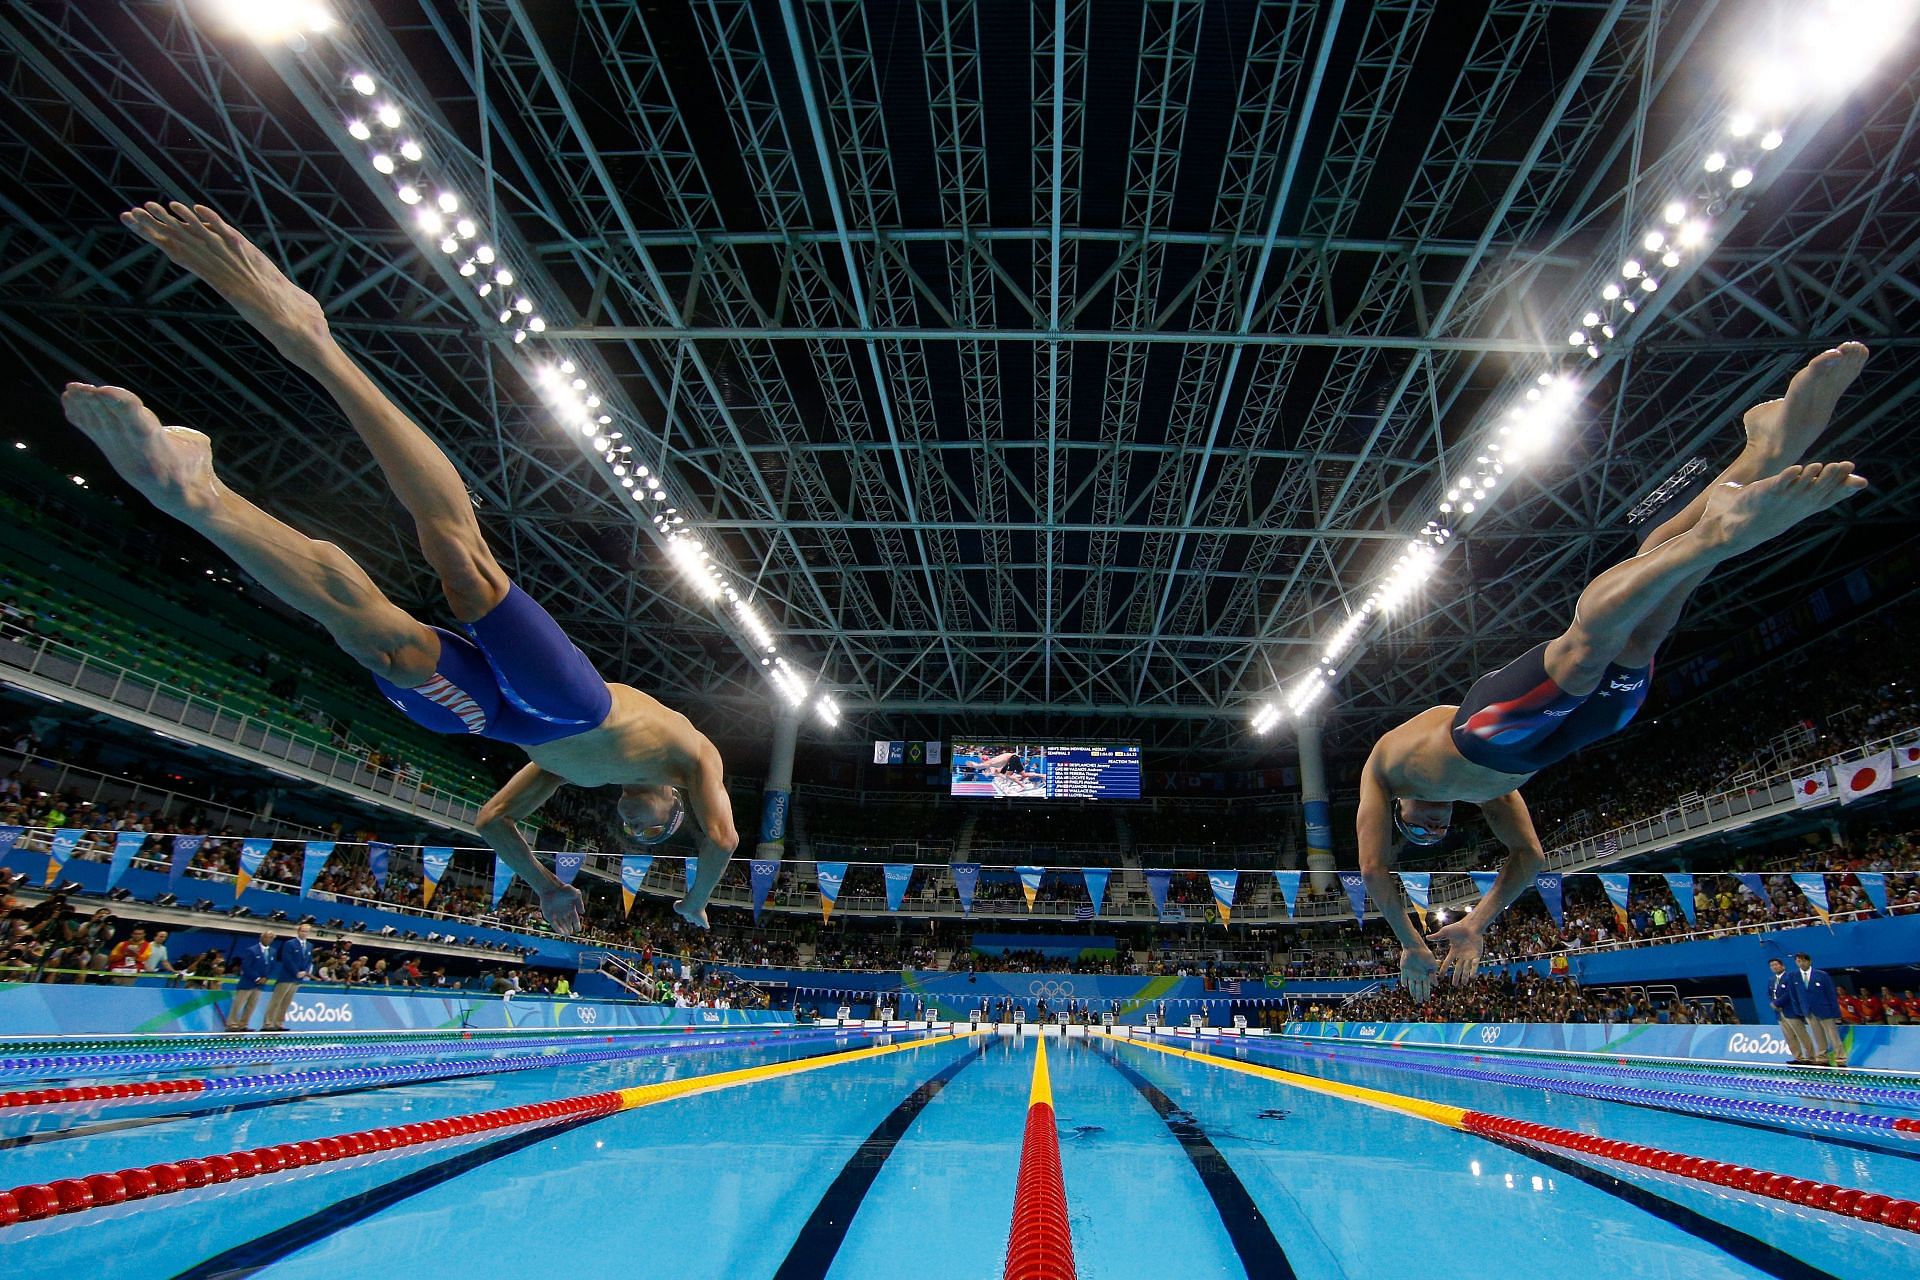 Michael Phelps and Ryan Lochte of the United States compete in the second Semifinal of the Men&#039;s 200m Individual Medley on Day 5 of the Rio 2016 Olympic Games at the Olympic Aquatics Stadium on August 10, 2016 in Rio de Janeiro, Brazil. (Photo by Al Bello/Getty Images)